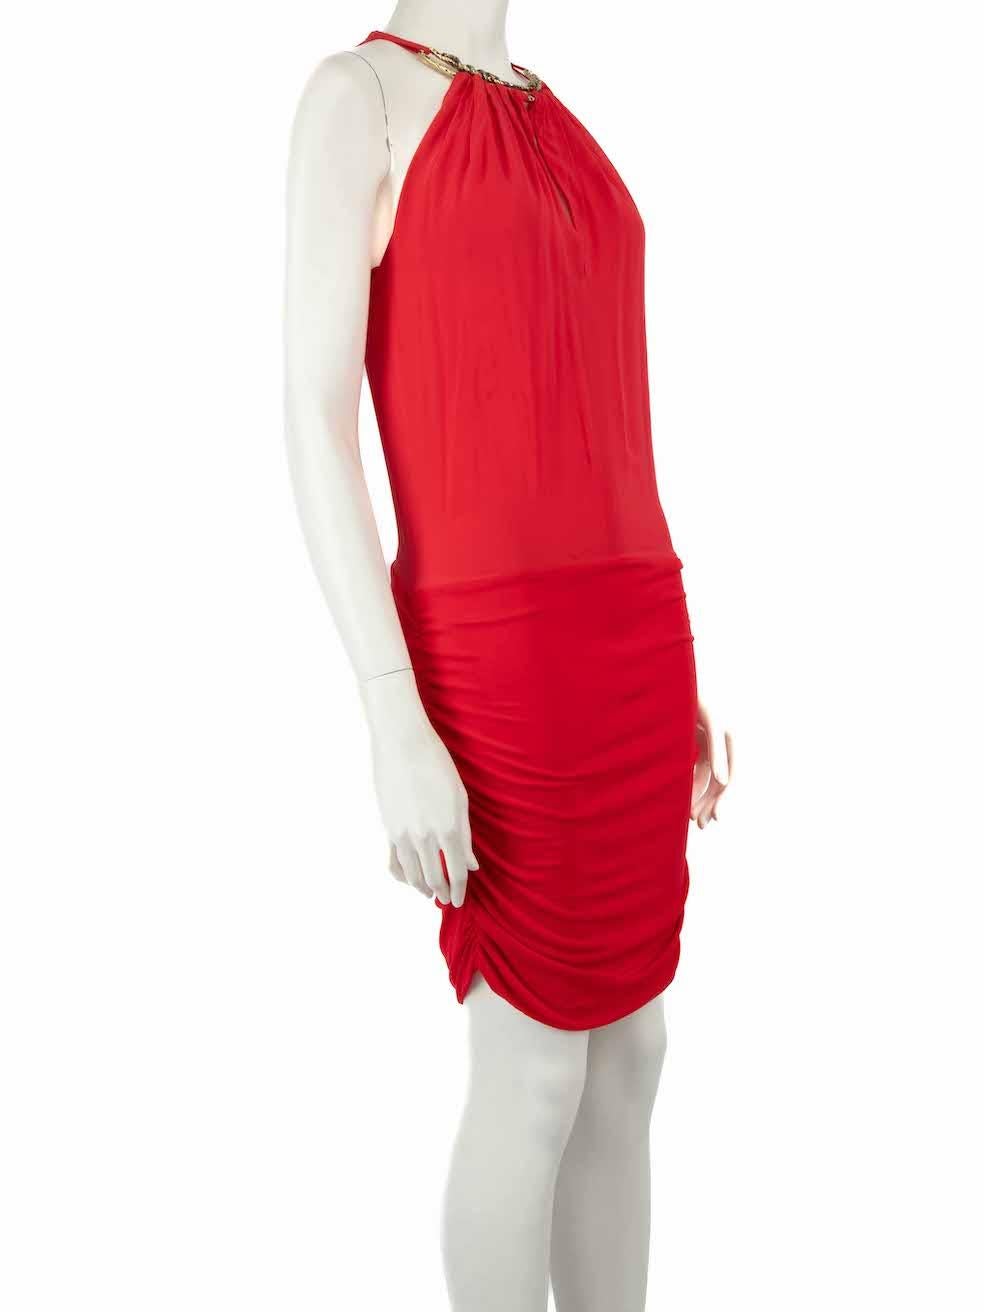 CONDITION is Good. General wear to dress is evident. Moderate signs of wear to the front and back with discoloured marks and plucks to the weave on this used Roberto Cavalli designer resale item.
 
 
 
 Details
 
 
 Red
 
 Viscose
 
 Dress
 
